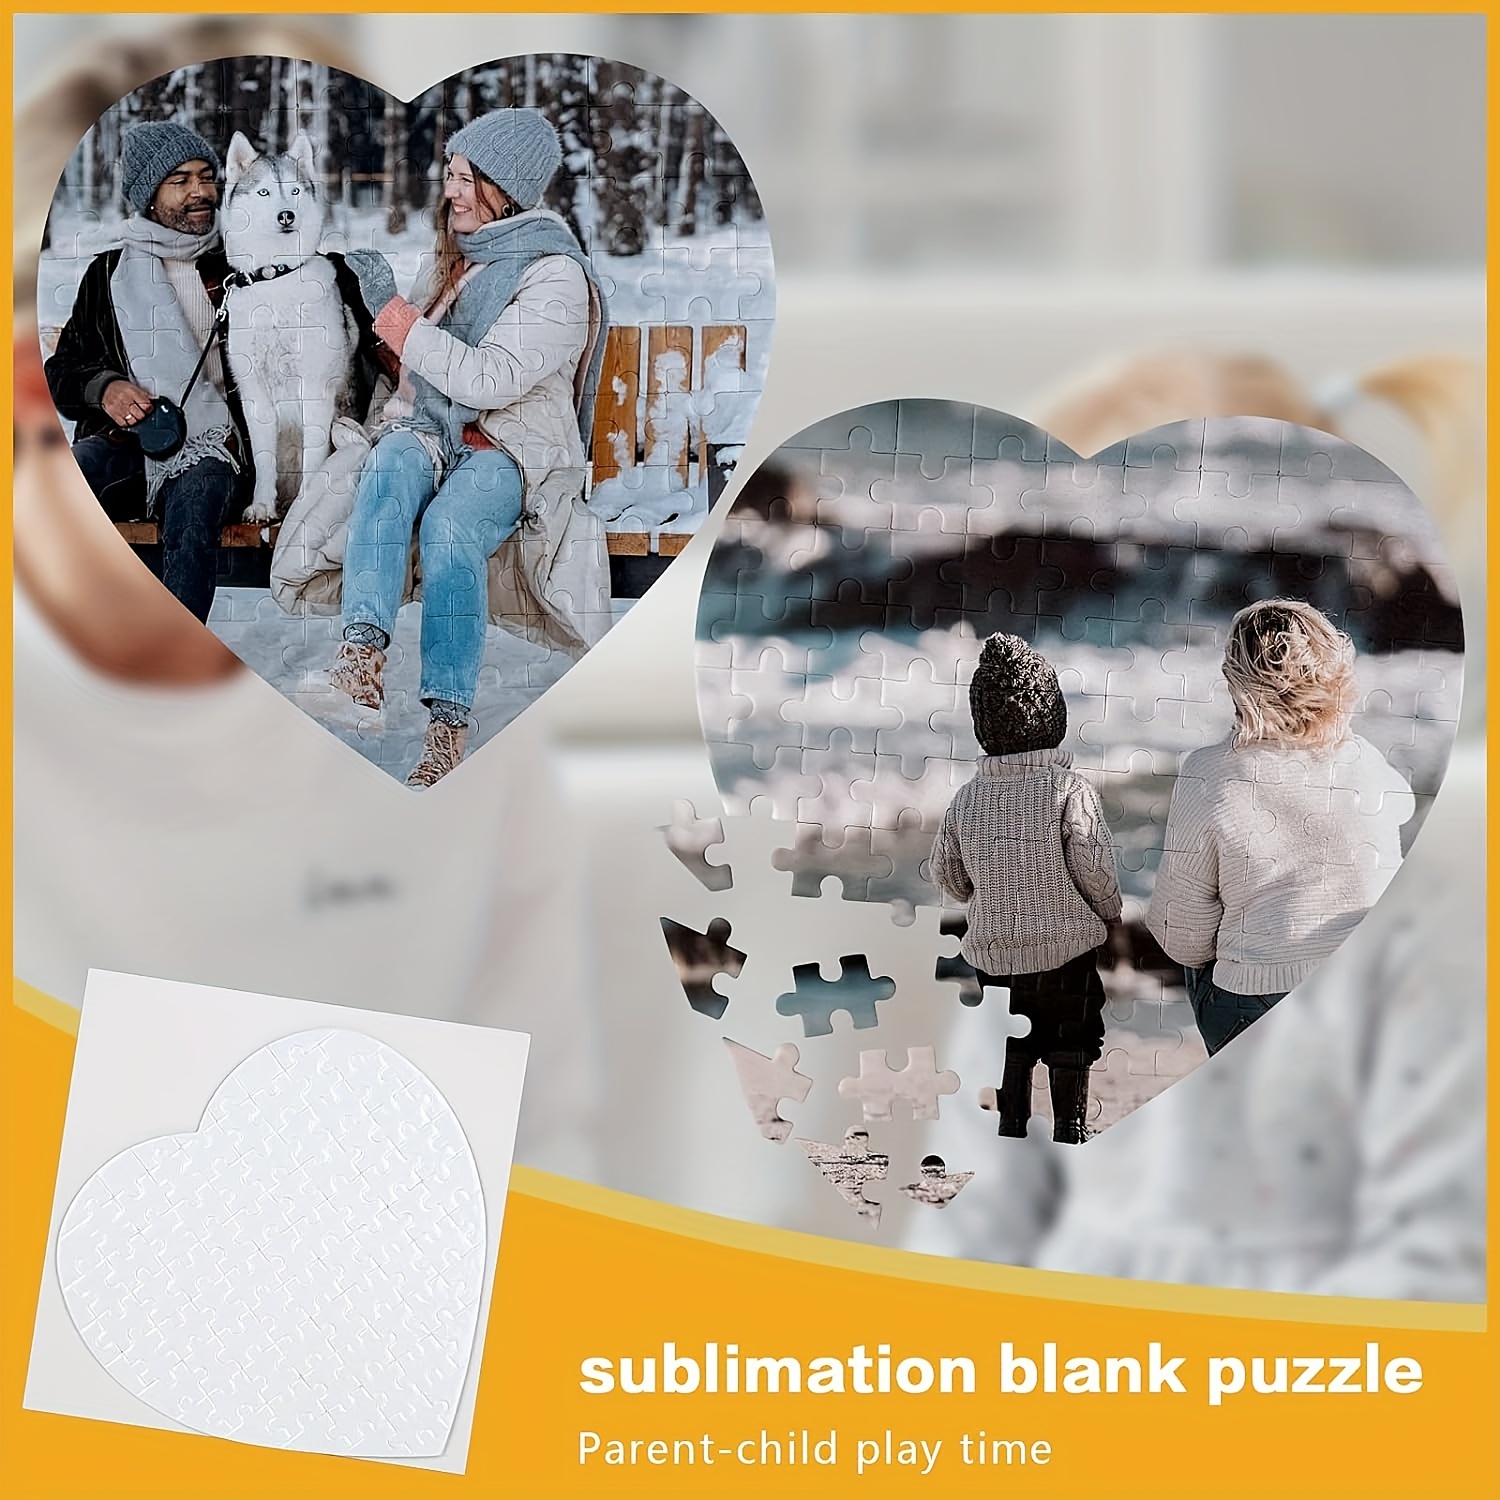 13 Sheets Blank Puzzles Blank White Jigsaw Puzzles Sublimation Puzzle Craft  for Boys Girls Decoration, DIY Invite, Photo Heat Transfer, 20 Pieces